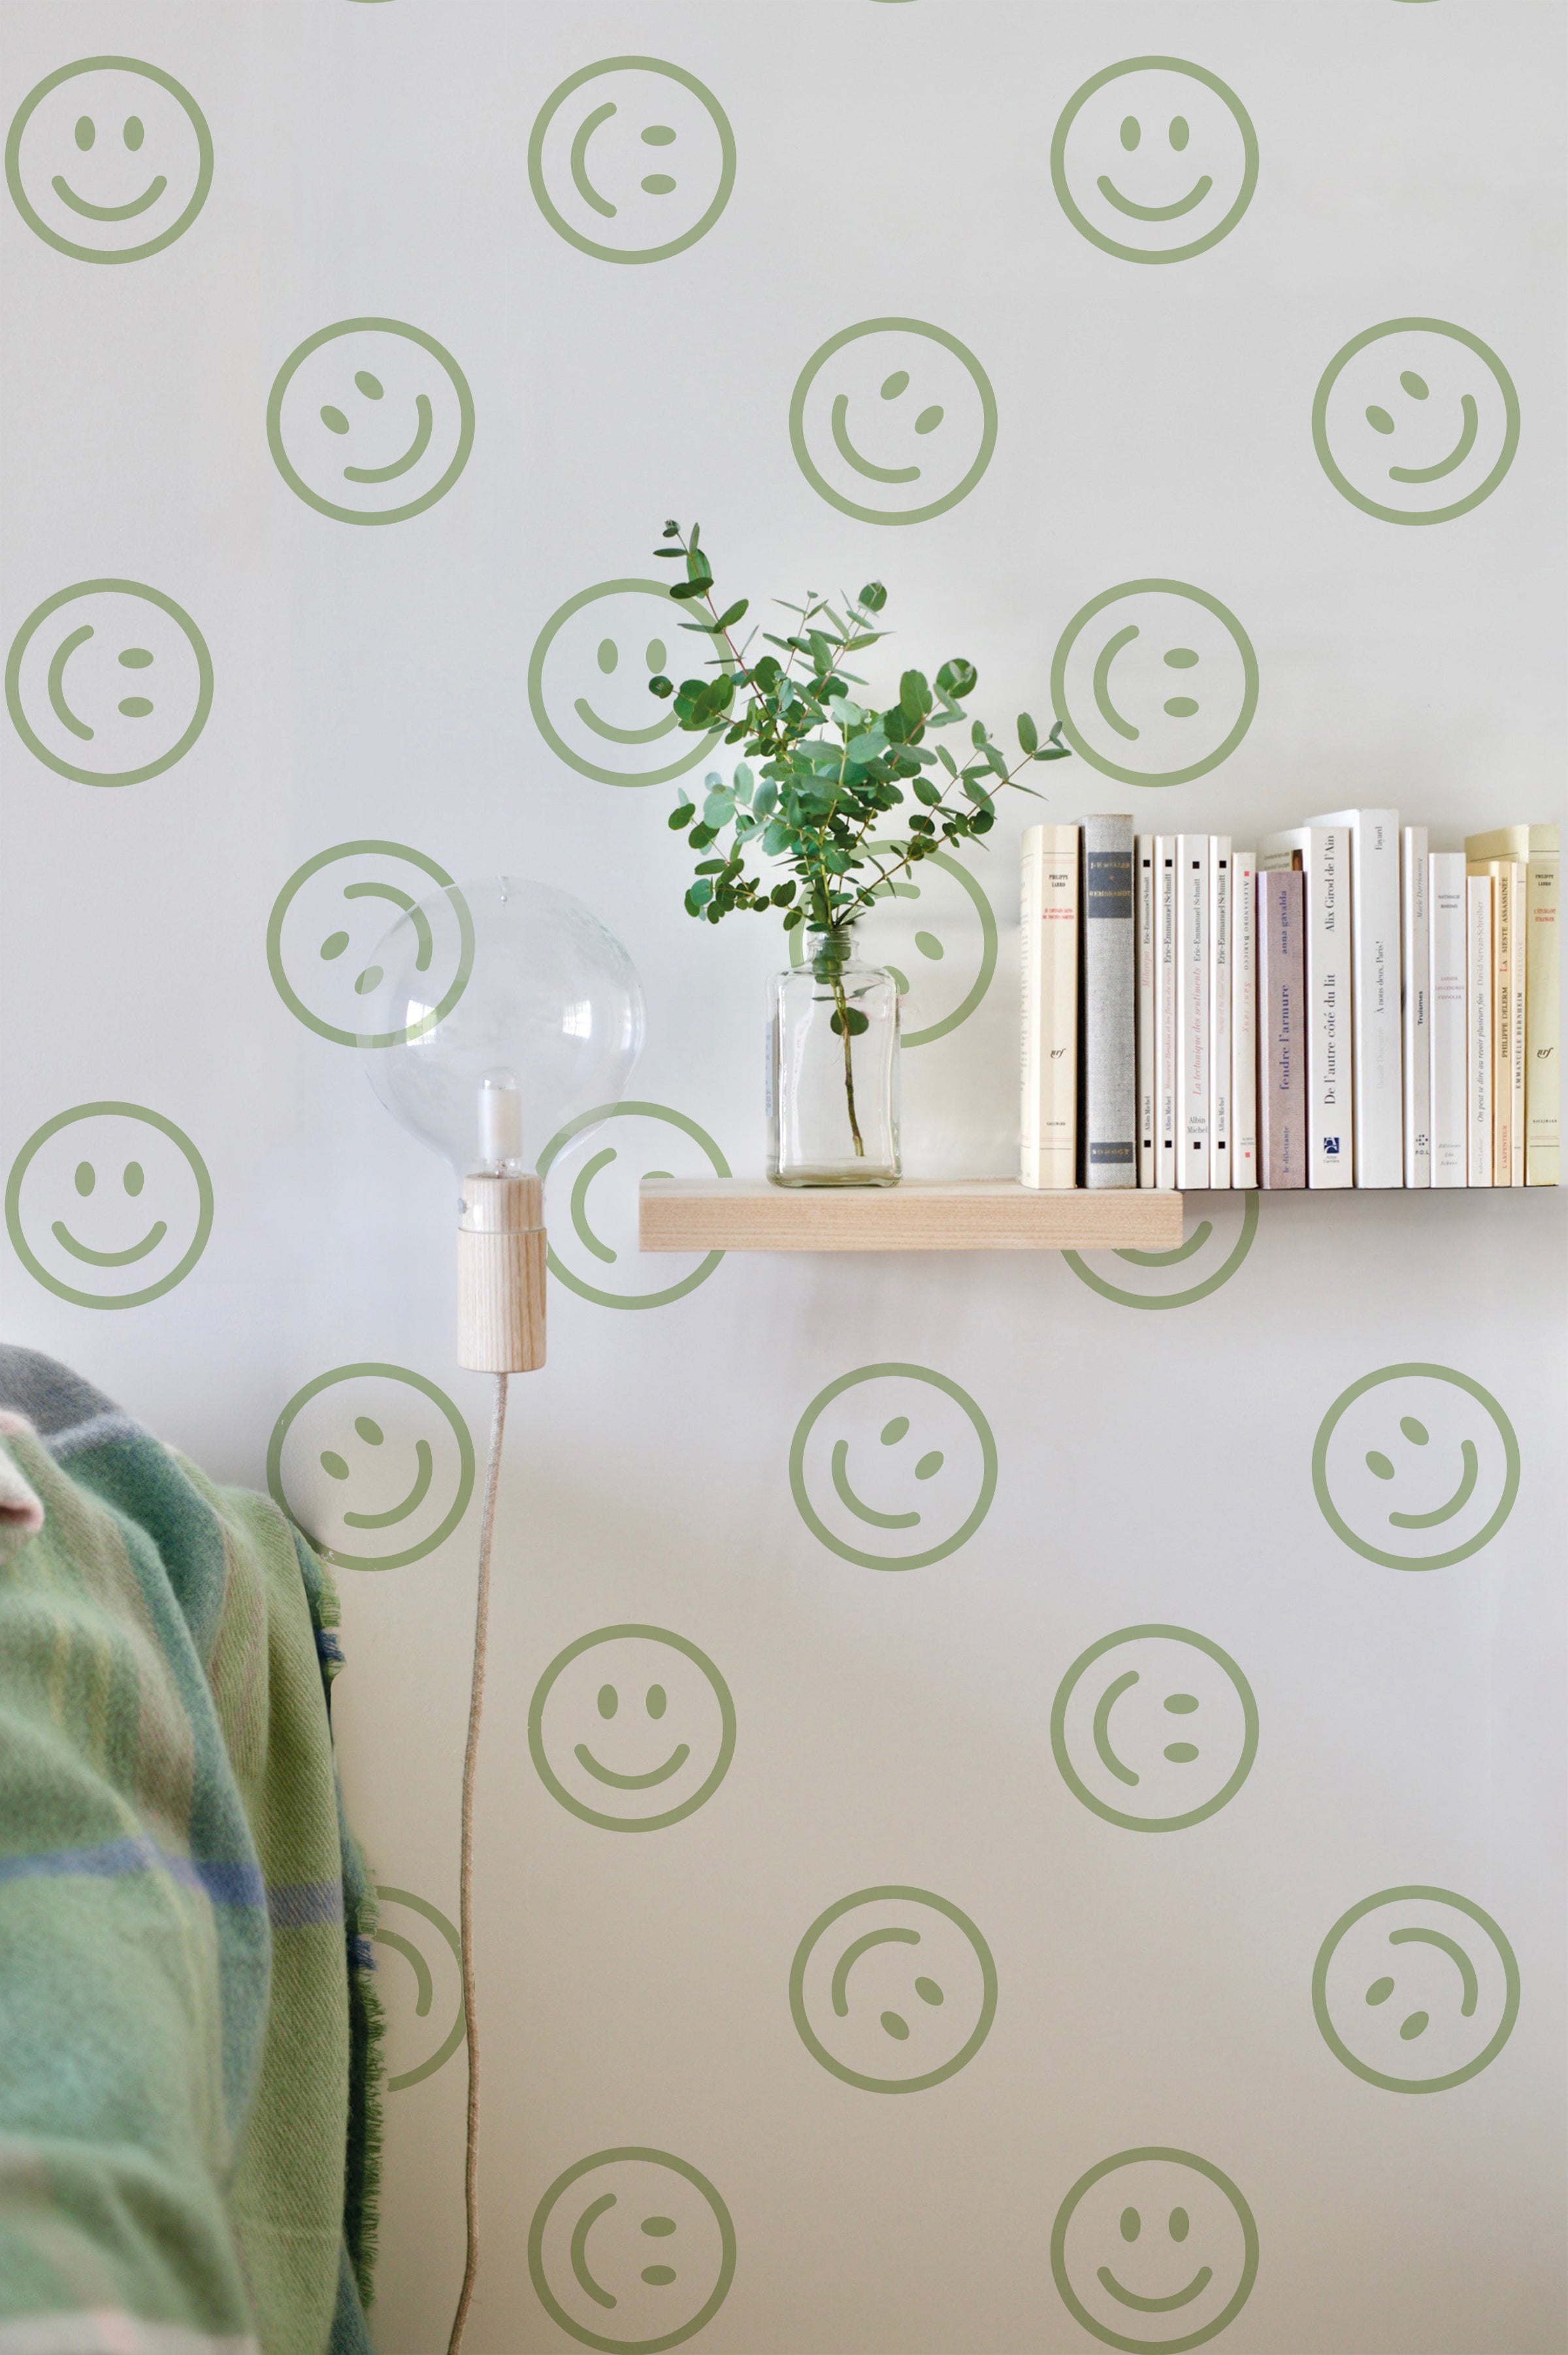 A modern and cheerful room with Smiley Wallpaper featuring green smiley faces on a light background. The decor includes a wooden shelf with books, a vase with greenery, and a unique light fixture.